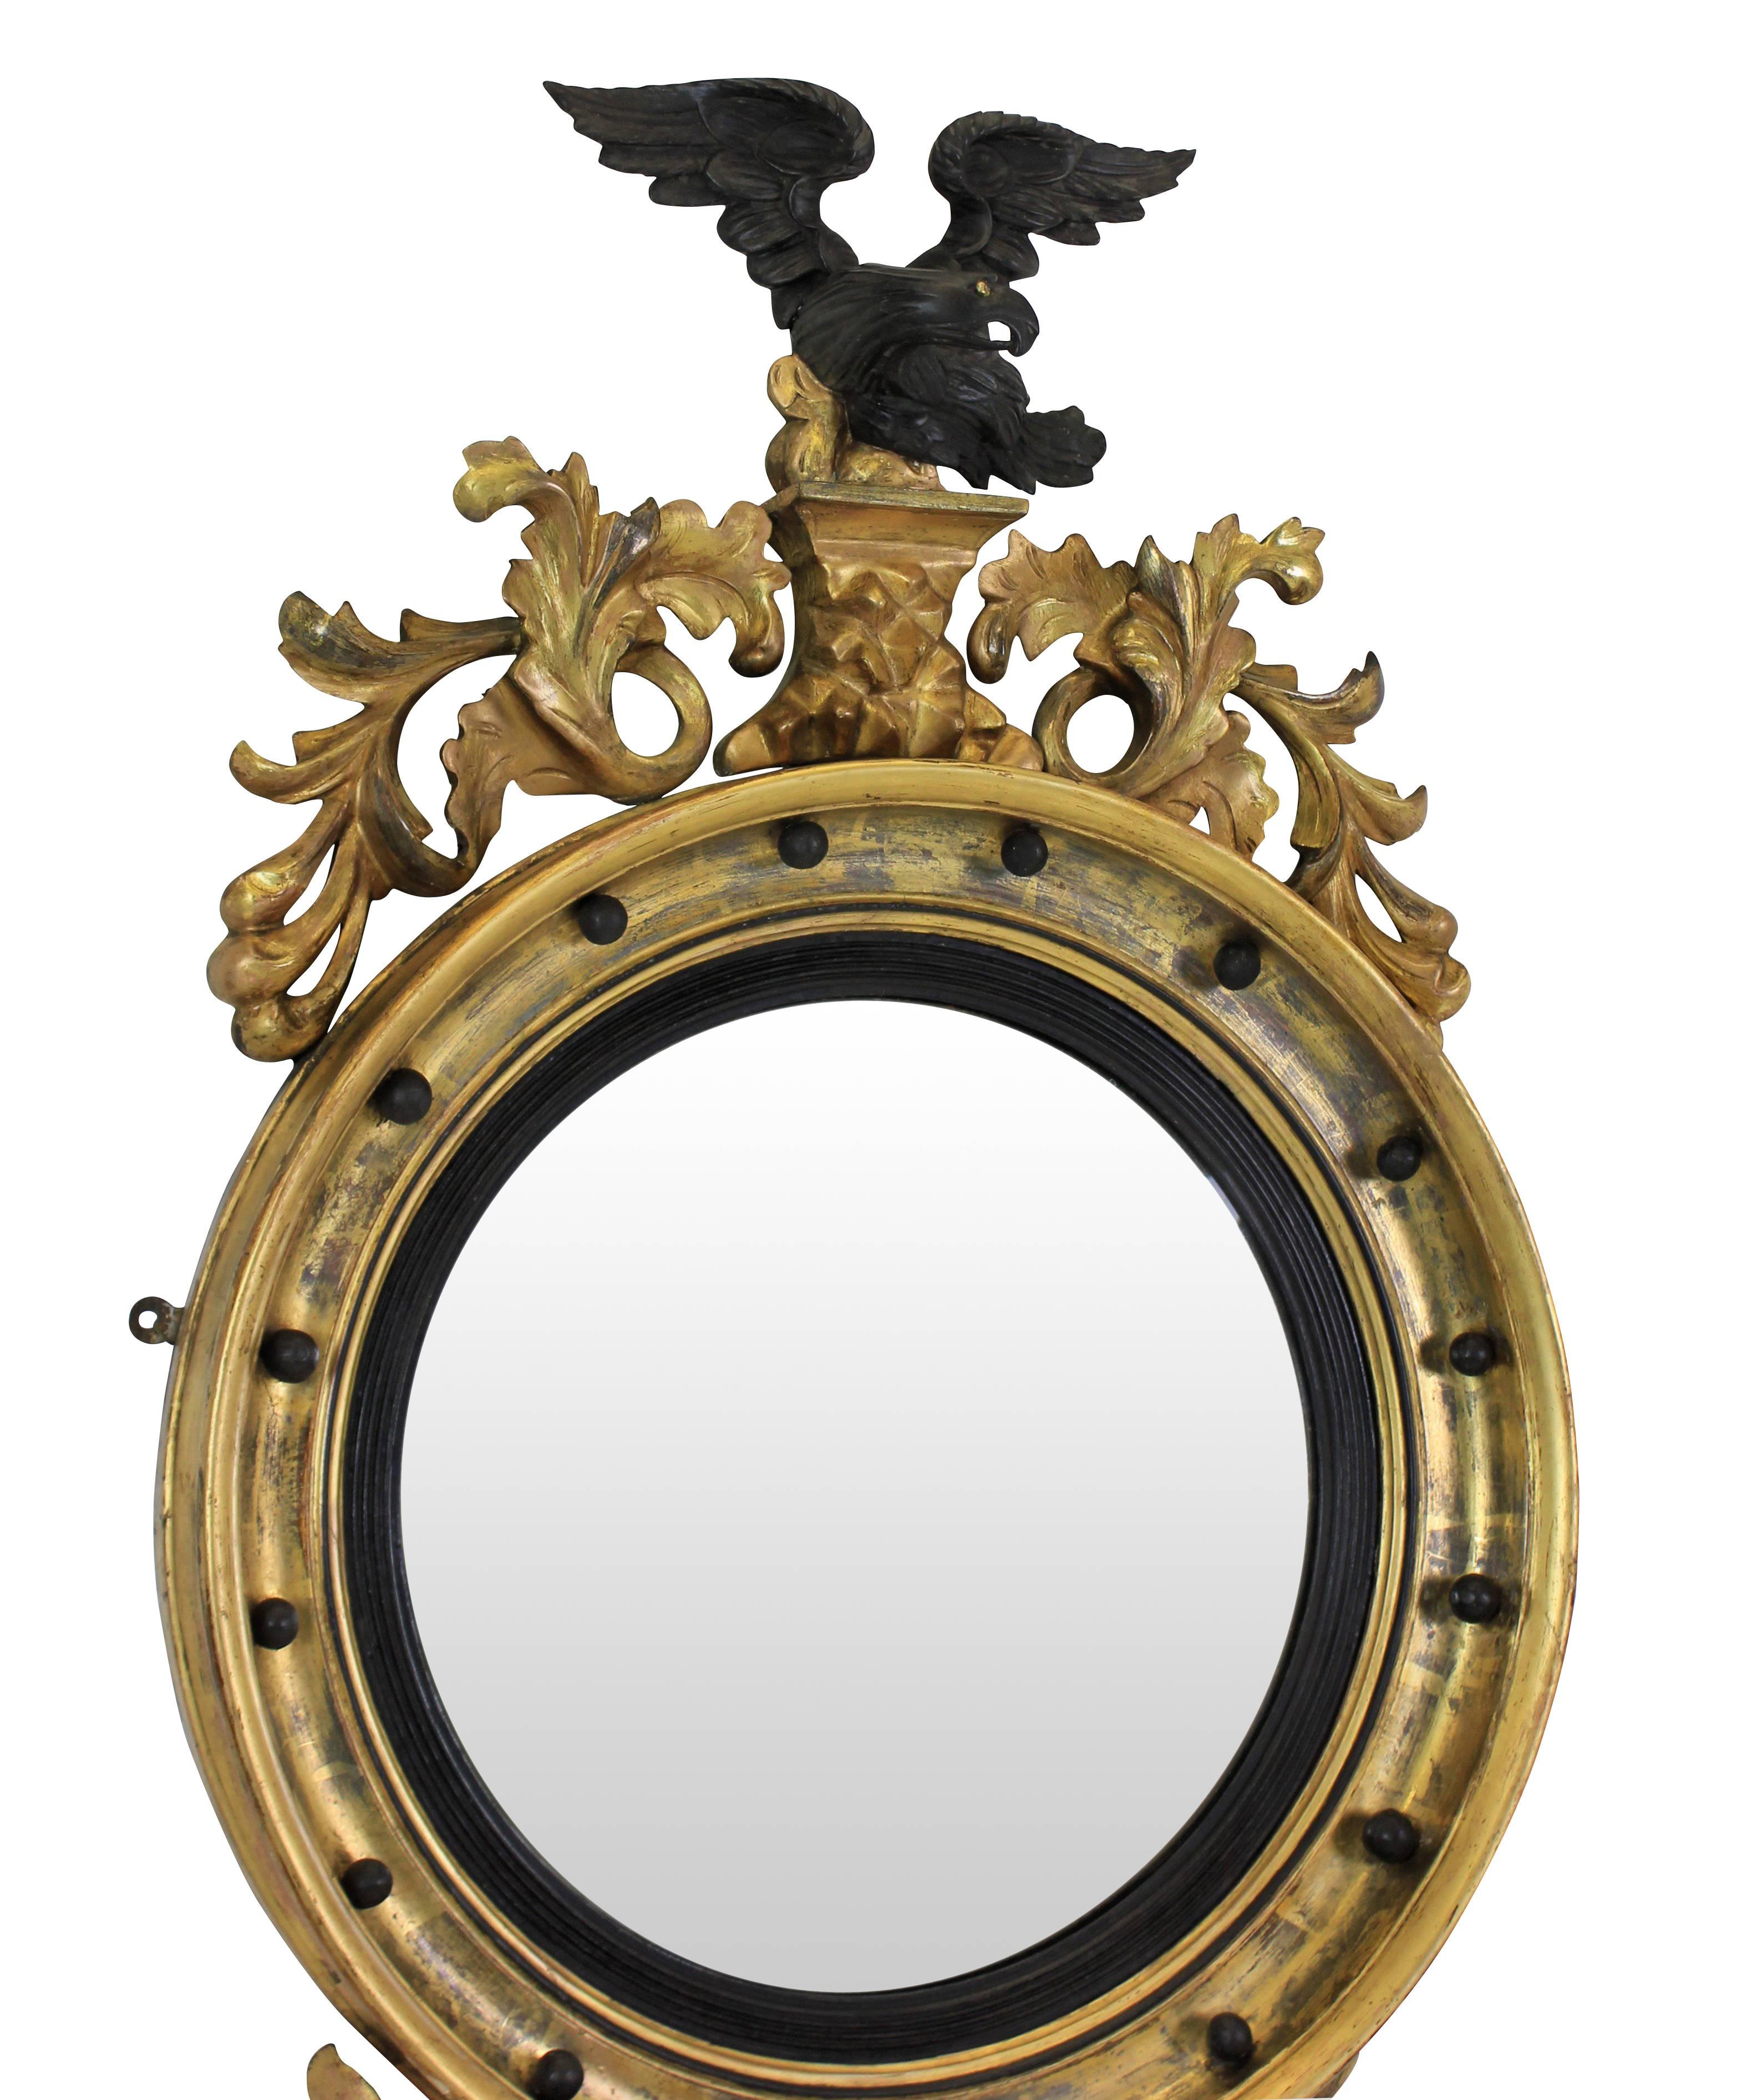 A lovely 19th century circular gilded convex mirror with ebonized slip, surmounted with An ebonized cresting carved eagle with a carved foliate apron.
 